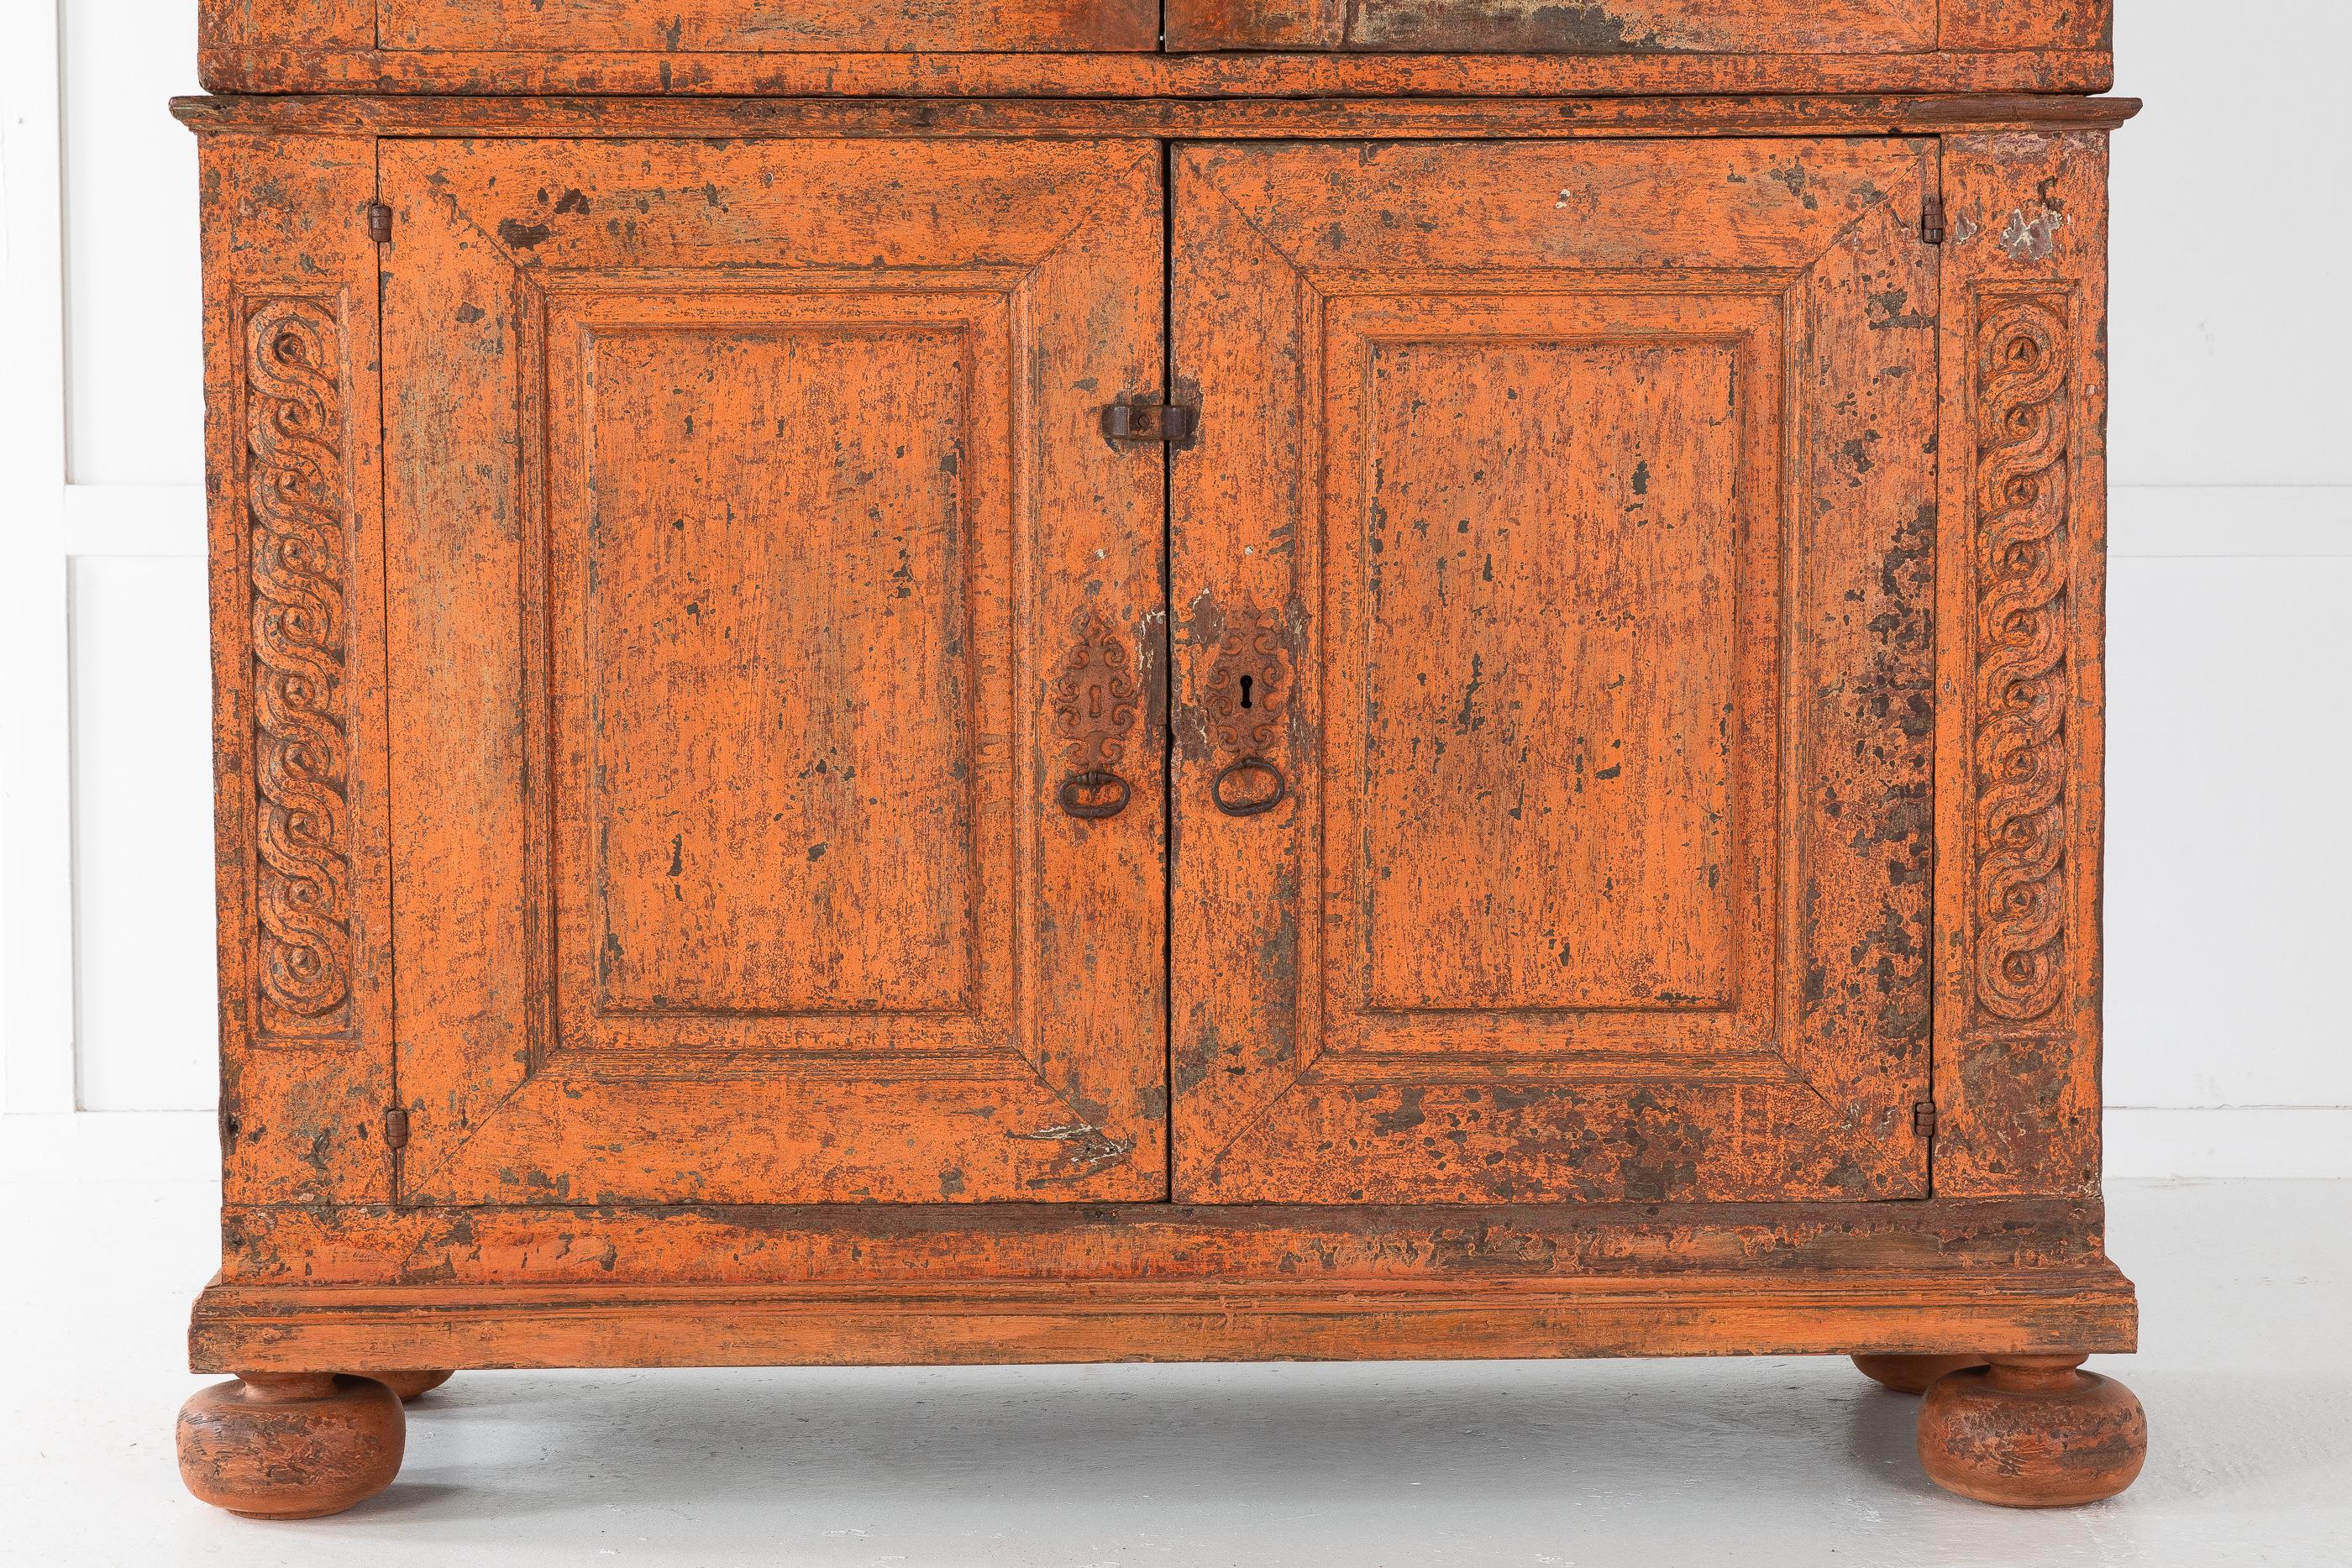 Carved 17th Century Portuguese Cabinet